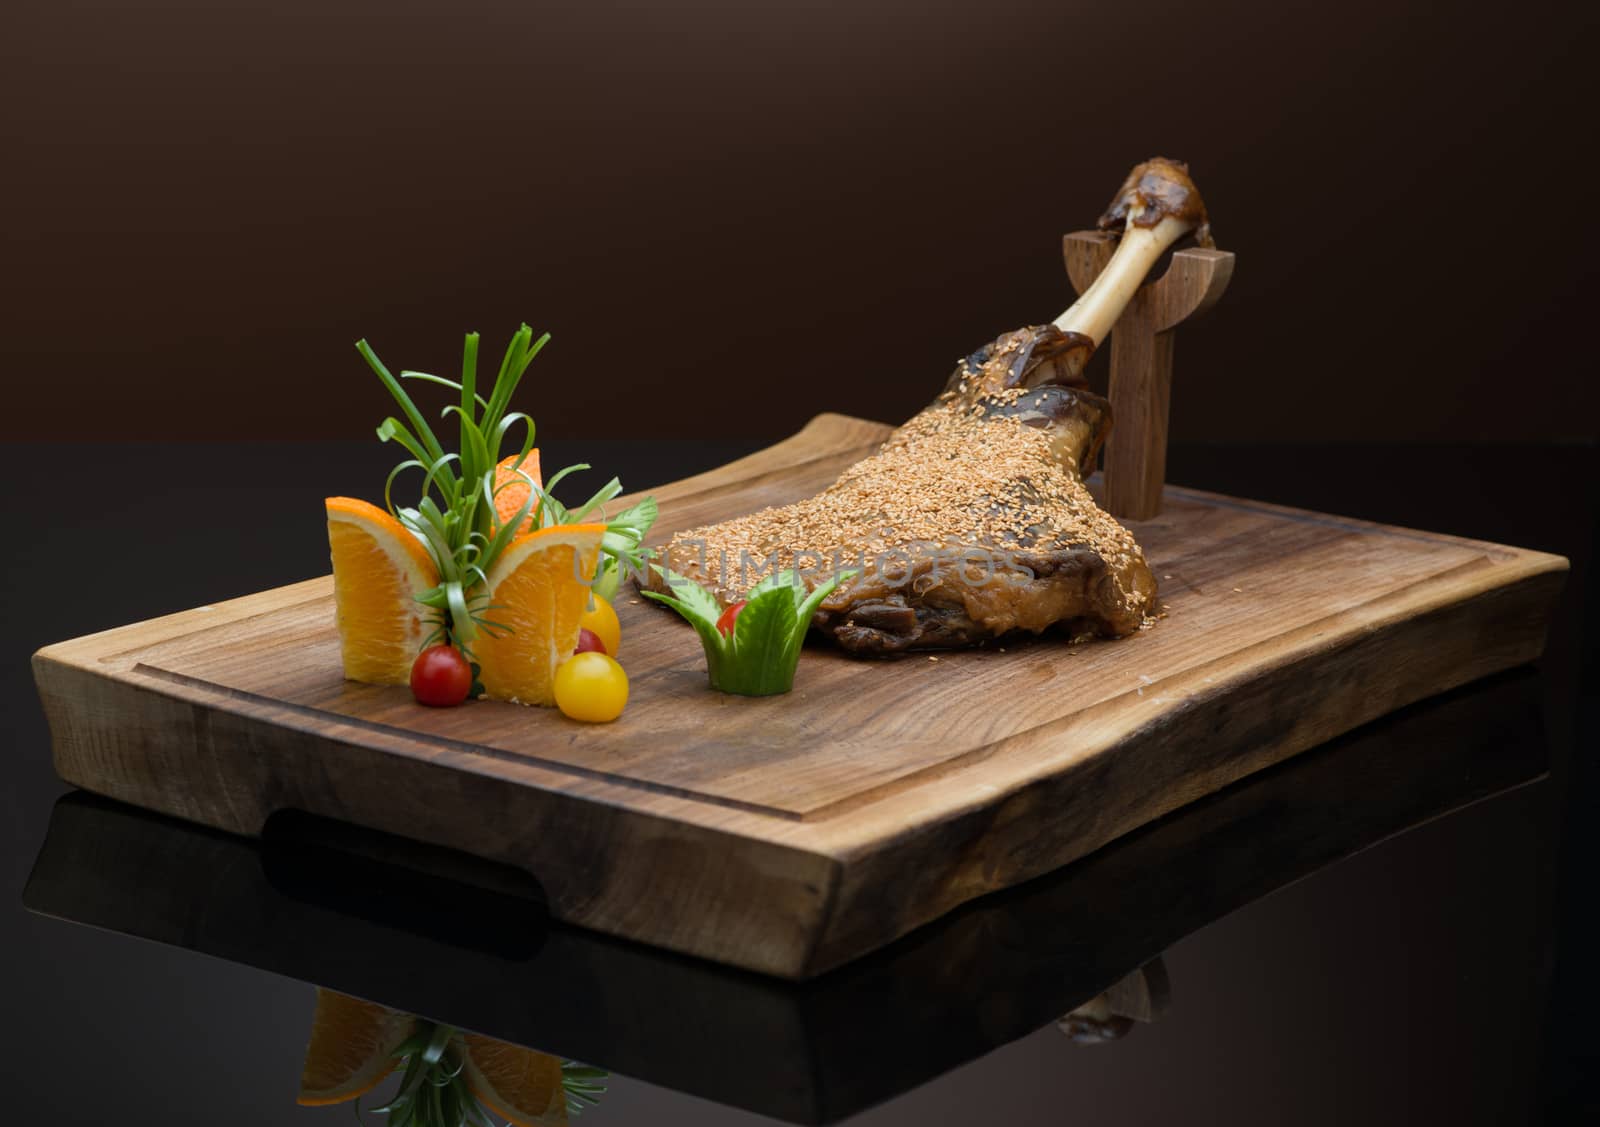 roasted meat with sesame seeds on a wooden tray, on a dark background